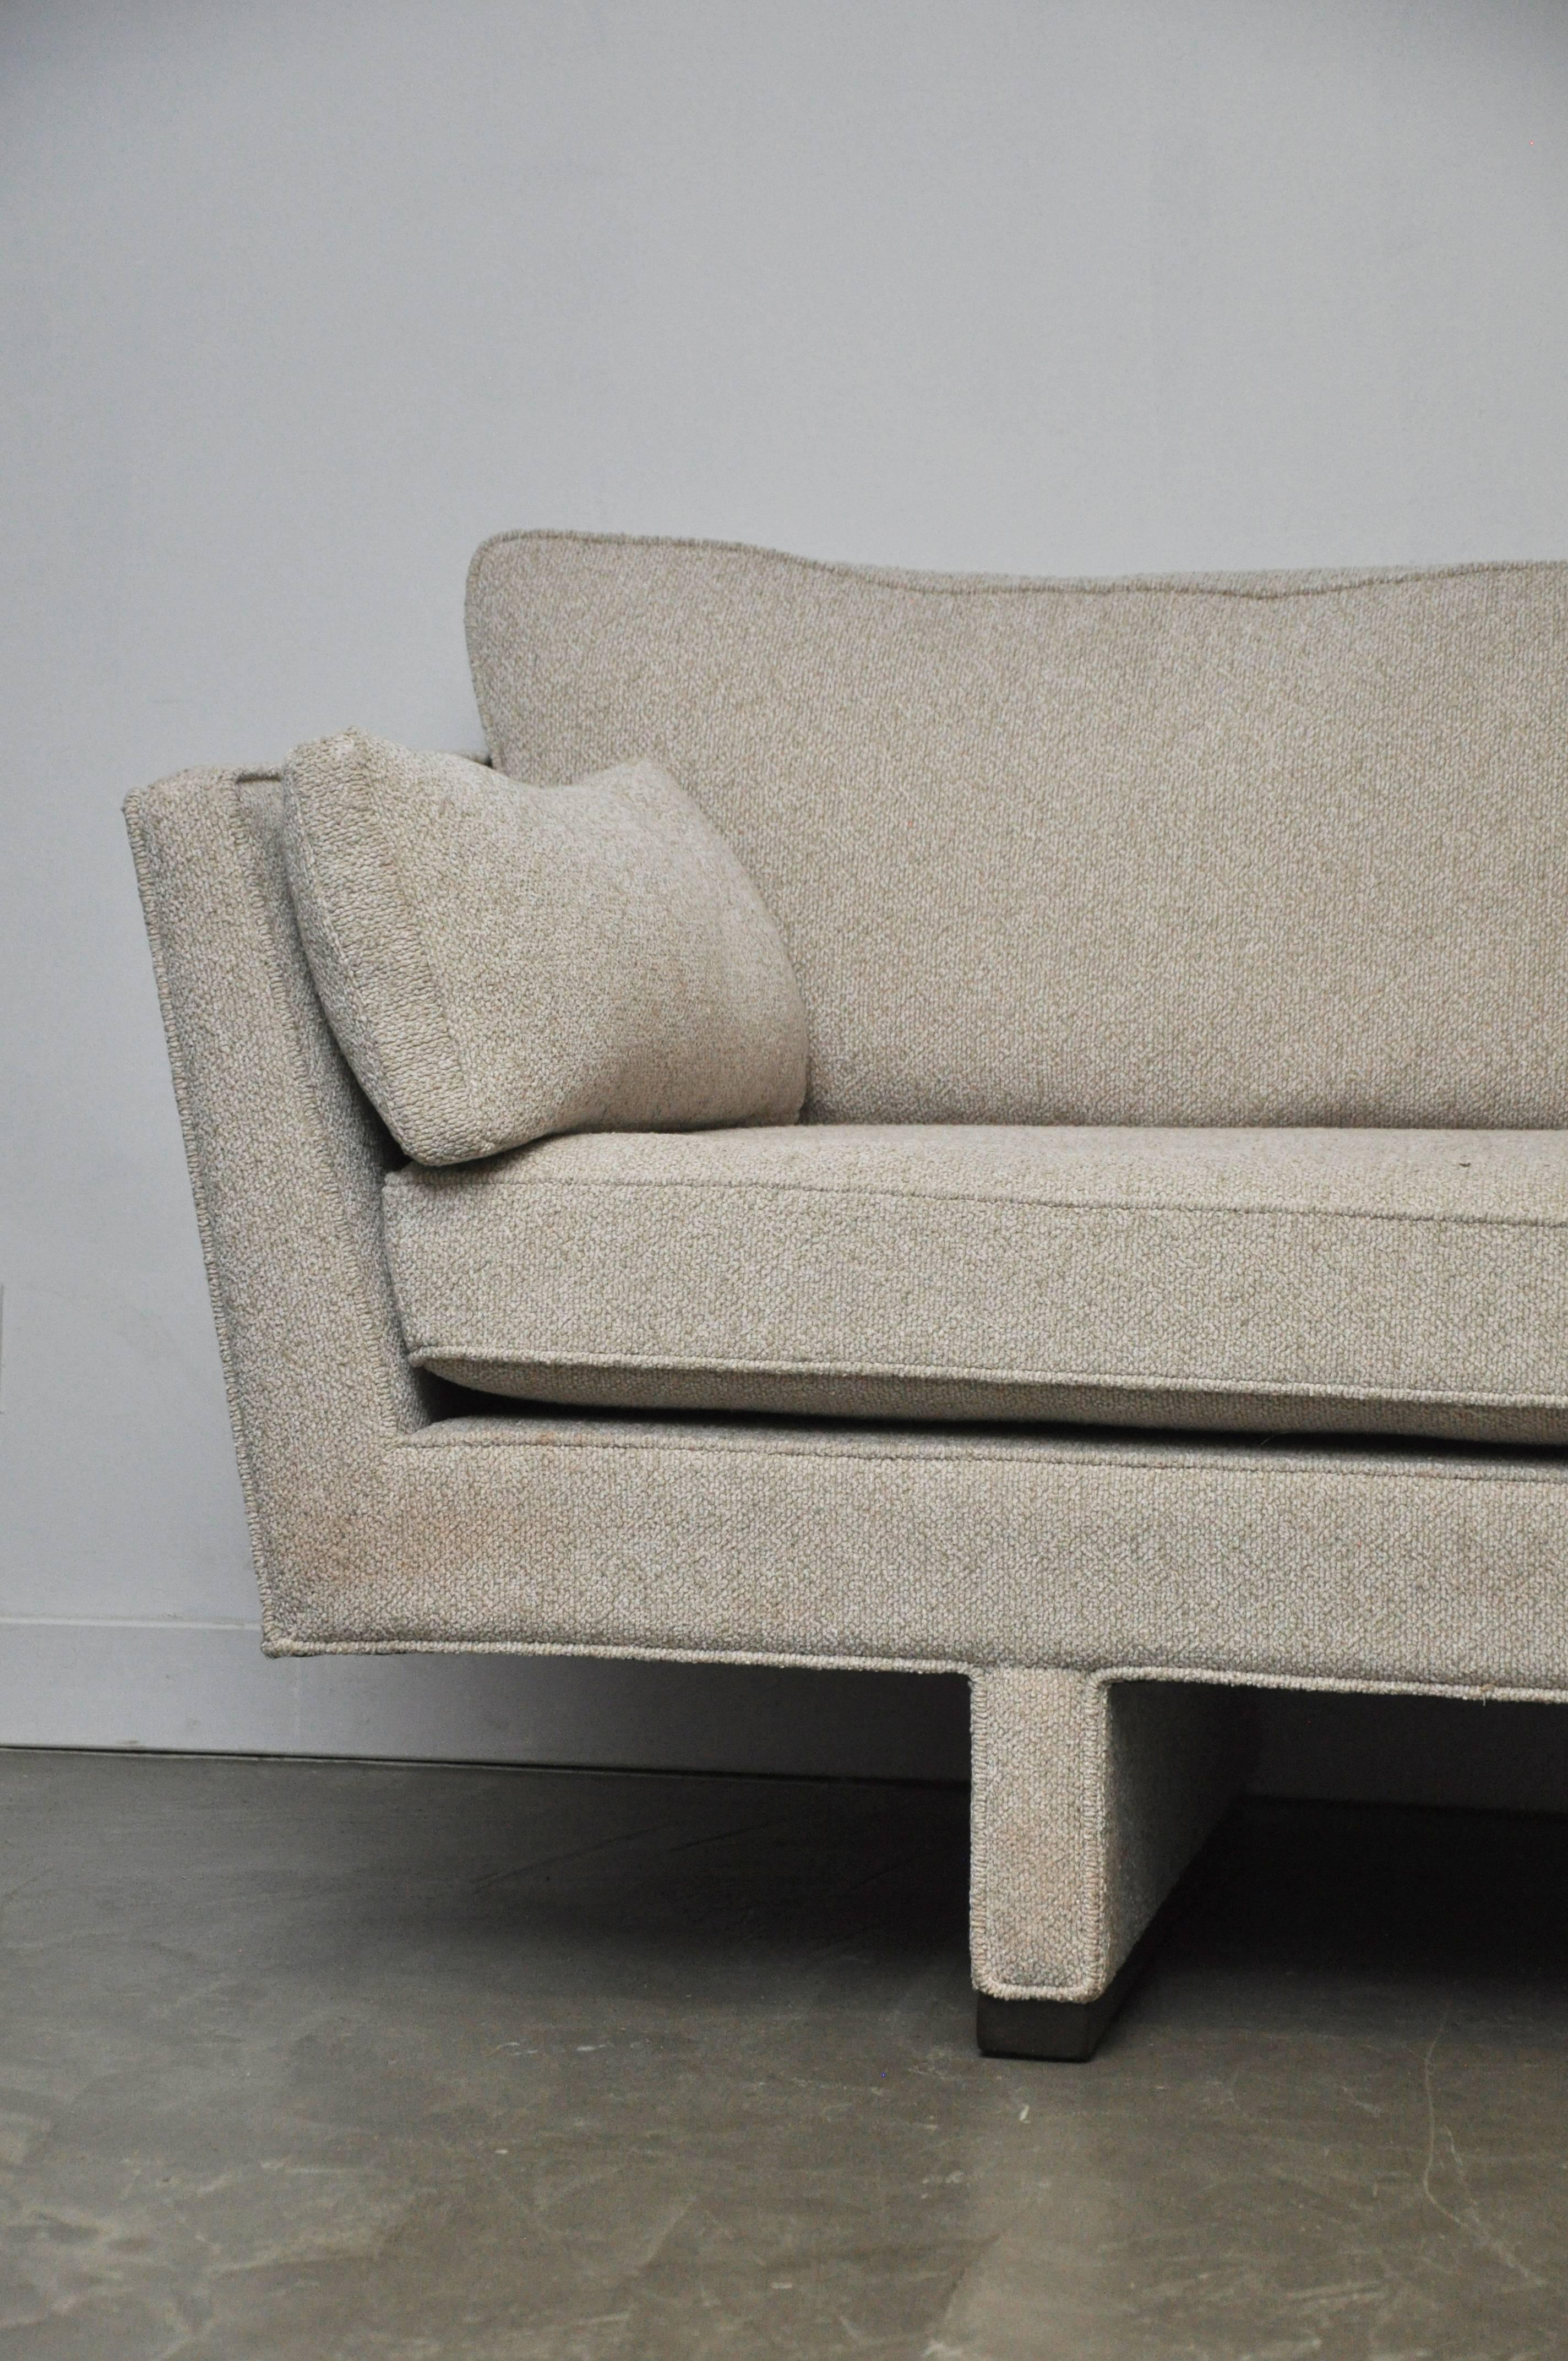 Rare form Dunbar sofa by Edward Wormley. Fully restored. New upholstery in cream white boucle with refinished walnut stained mahogany ski bases. Retains original Dunbar decking.